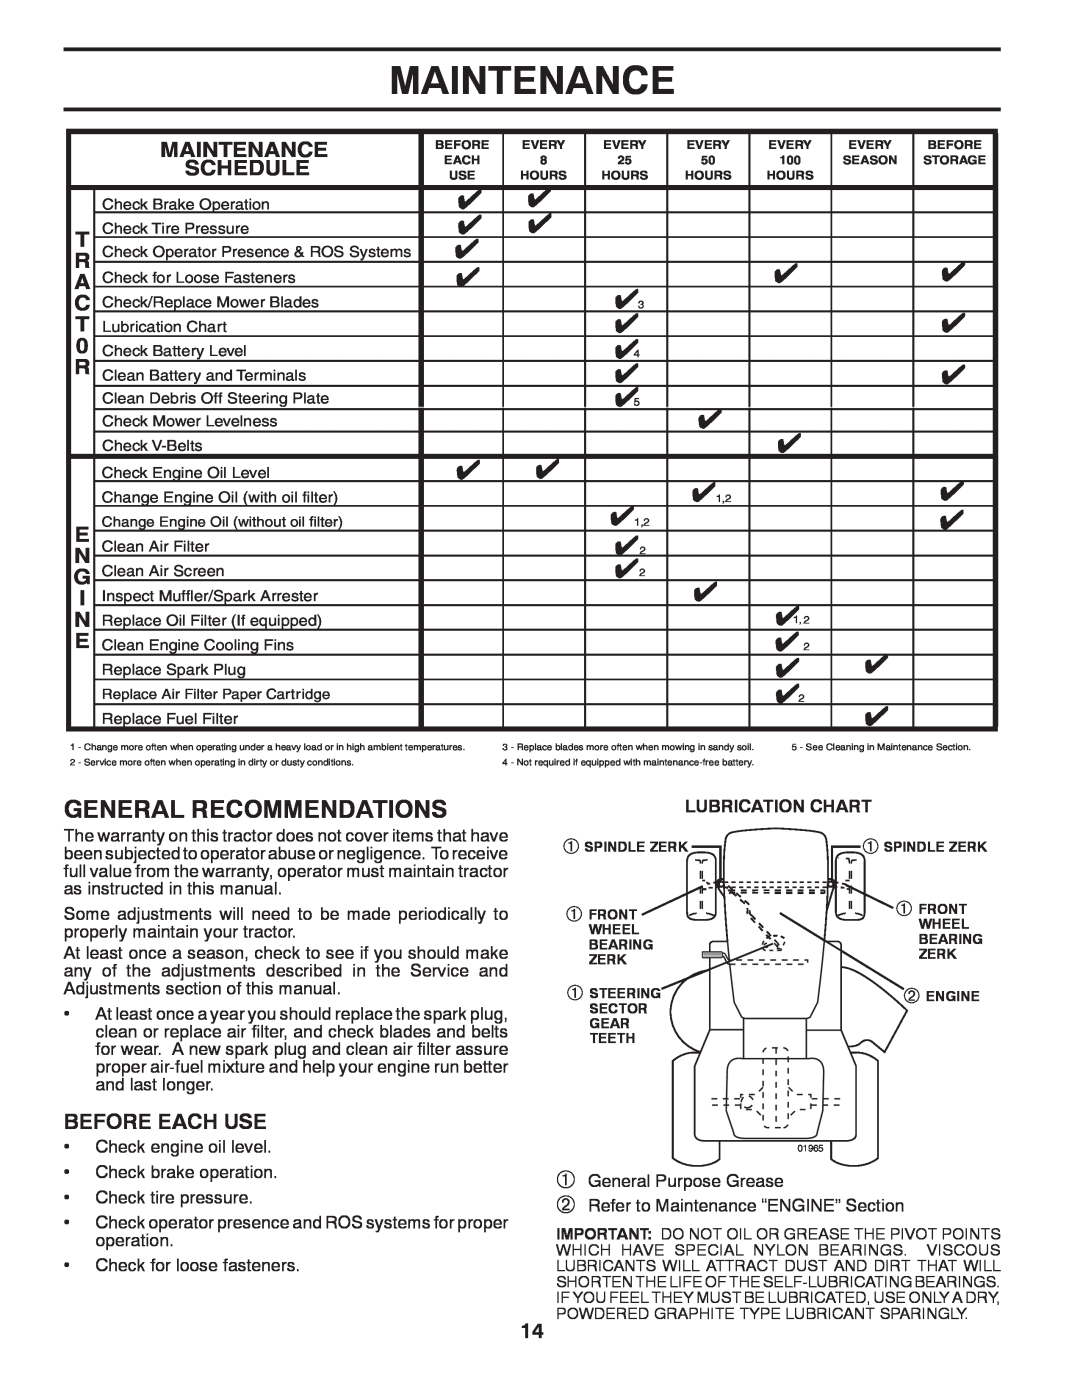 Ariens 935335 42 manual Maintenance, General Recommendations, Schedule, Before Each Use 